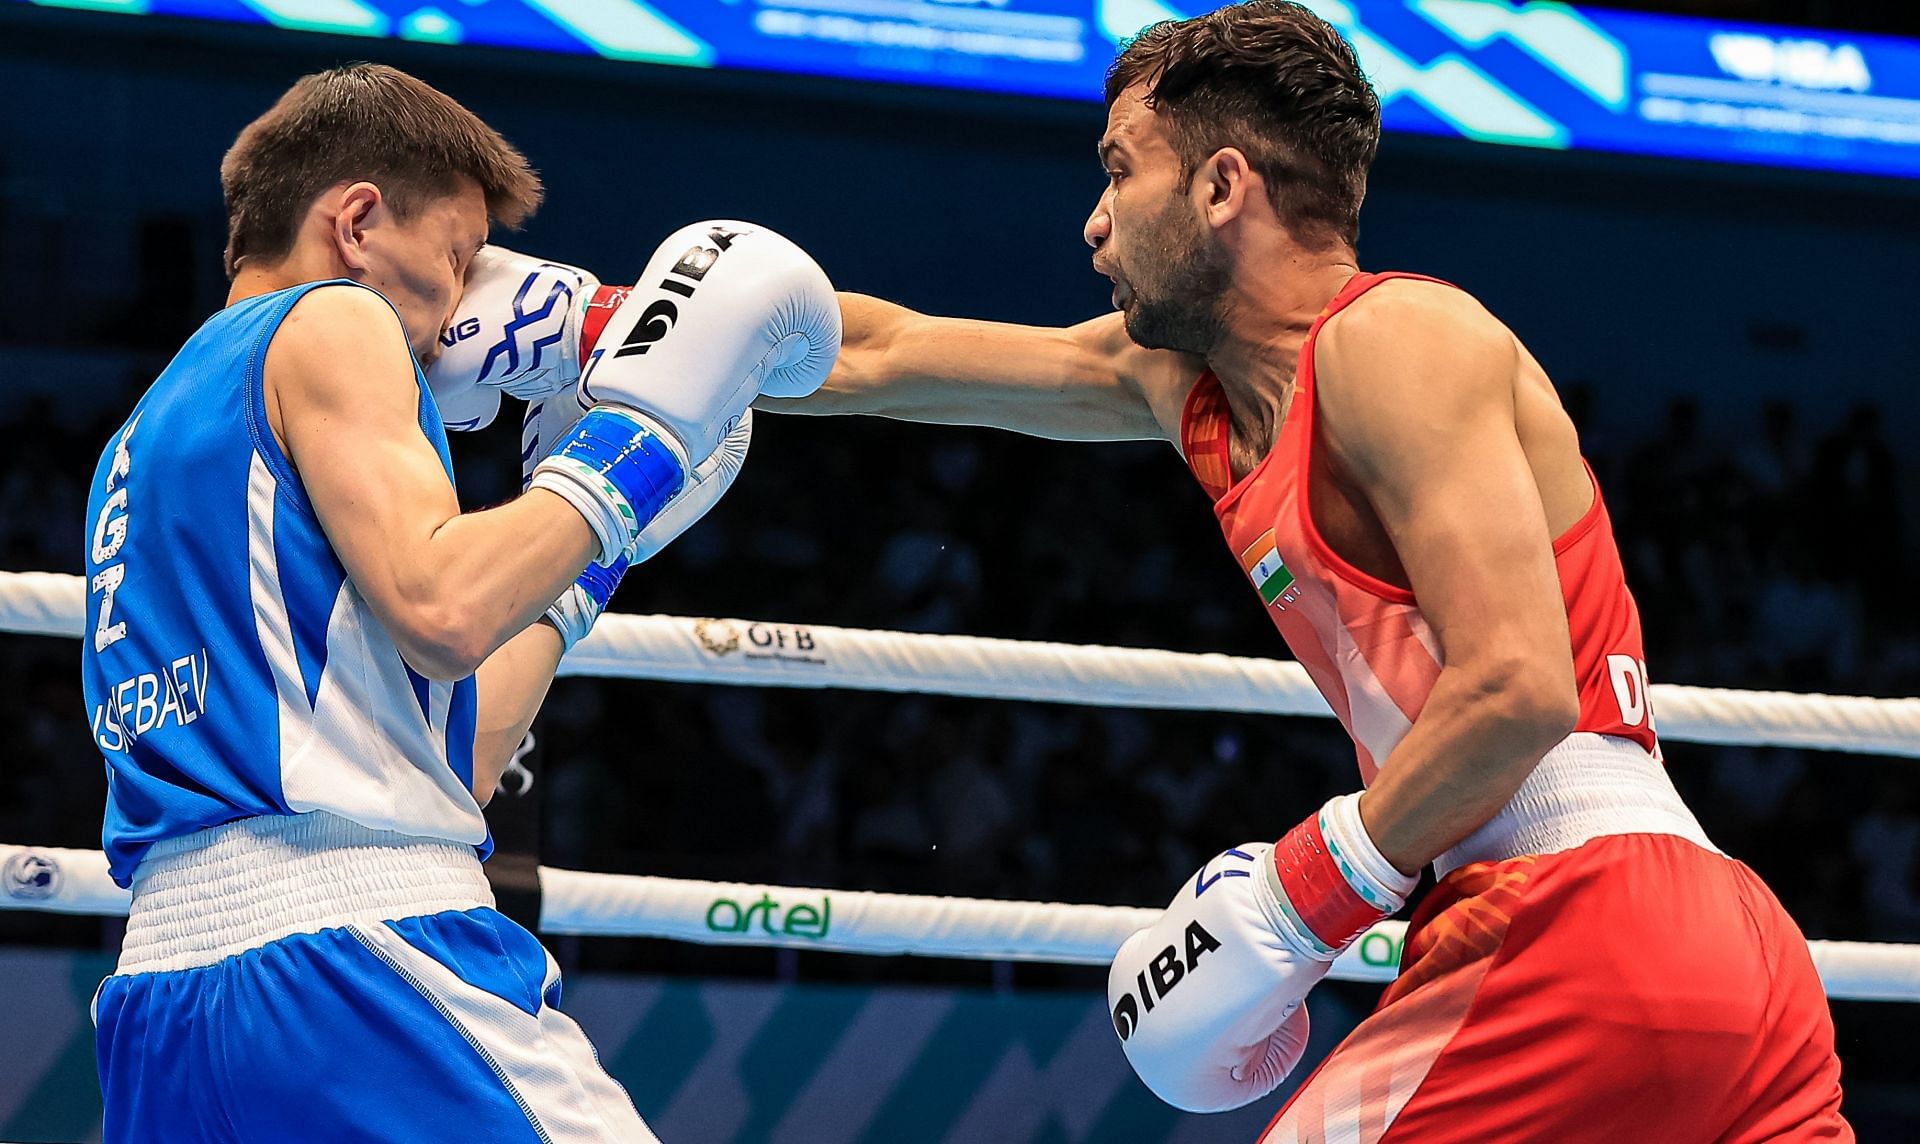 World Boxing Championships 2023 Deepak Bhoria vs Billal Bennama preview, head-to-head, prediction, where to watch and live streaming details